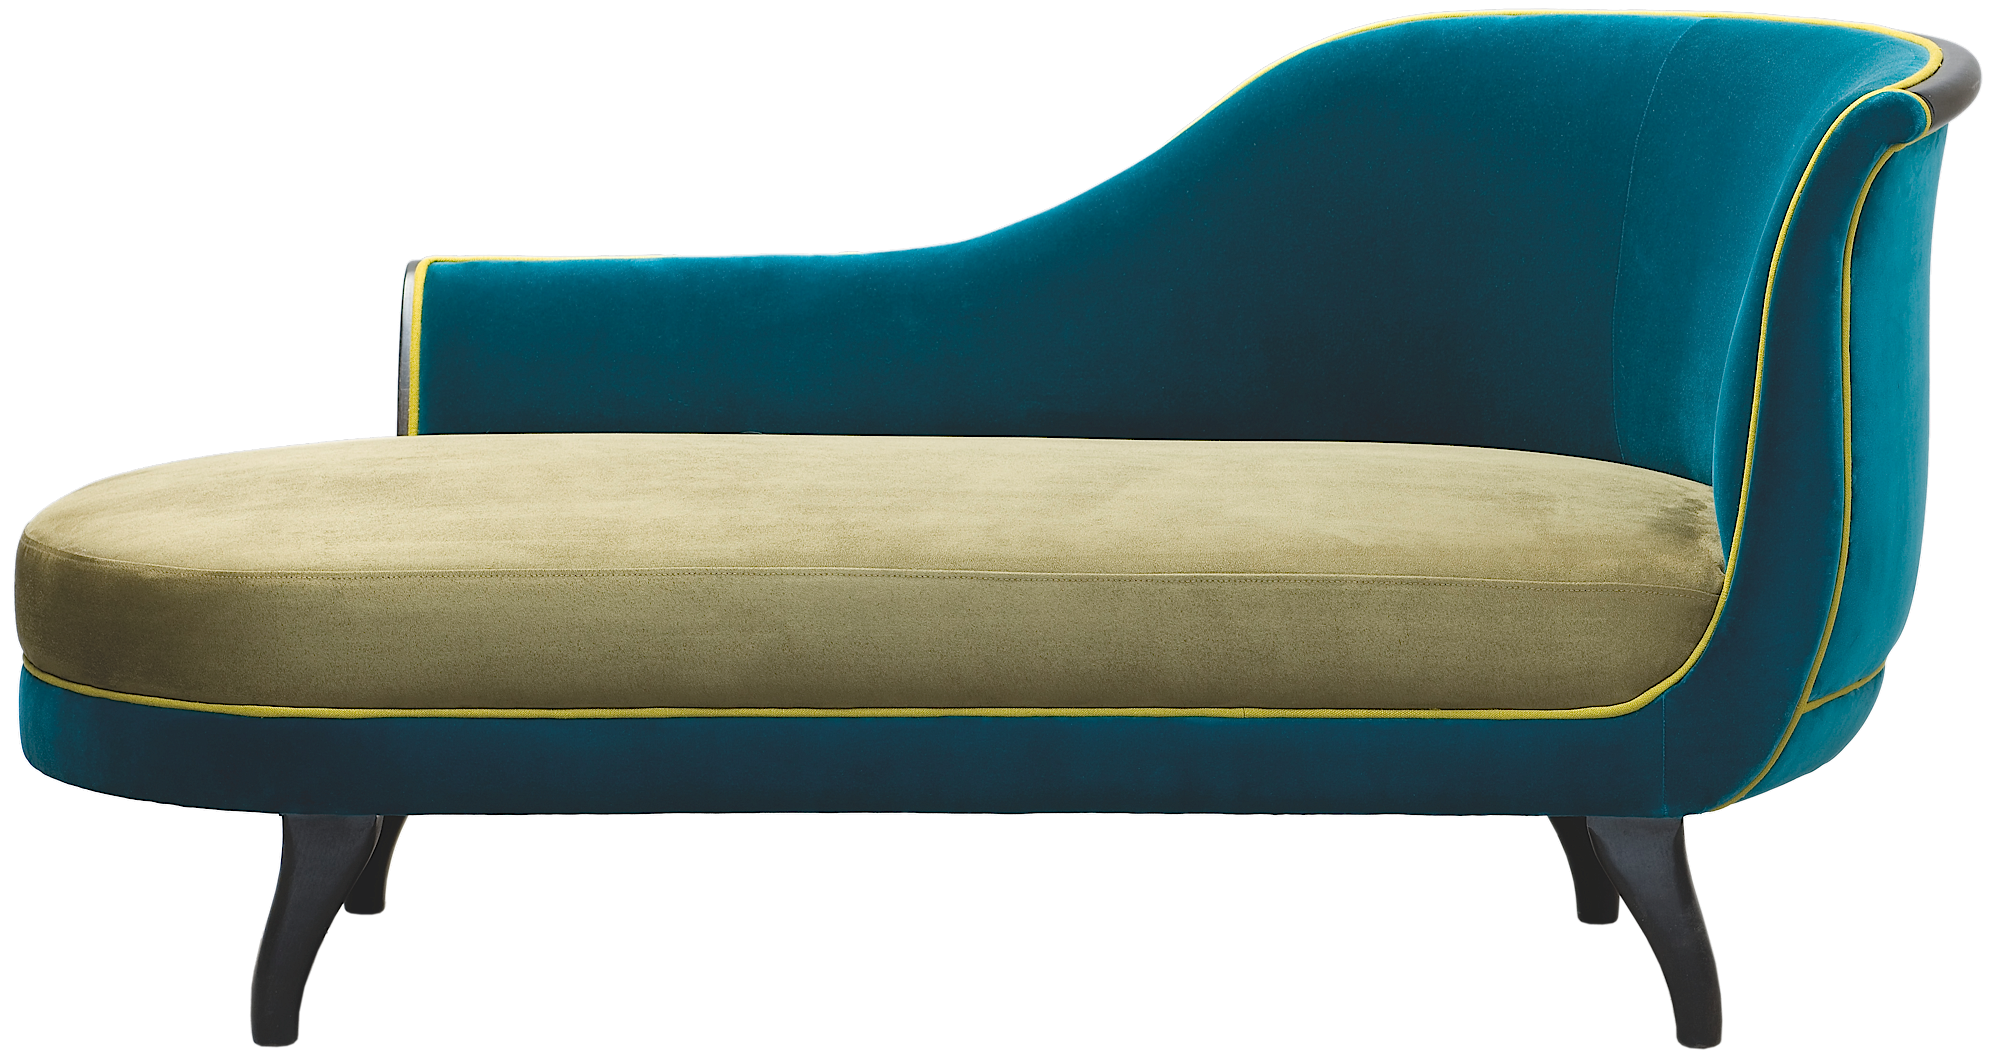 Chaise Lounge Free Download Image PNG Image